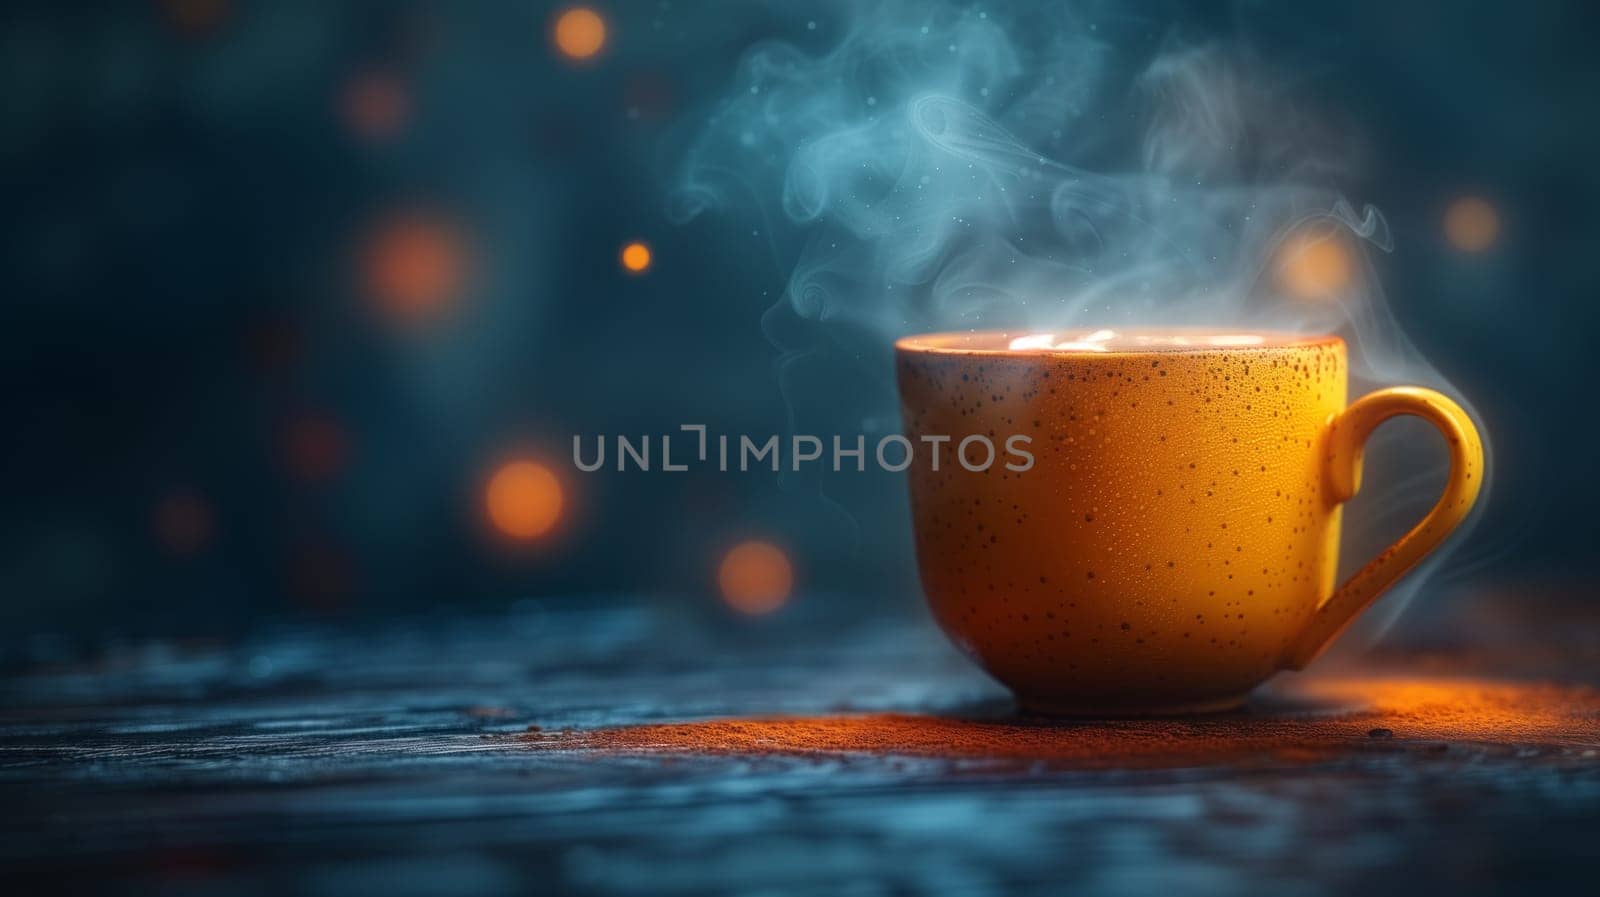 A steaming coffee cup is placed on a wooden table, emitting vapors. The serving of the drinkware creates a cloudlike effect on the table